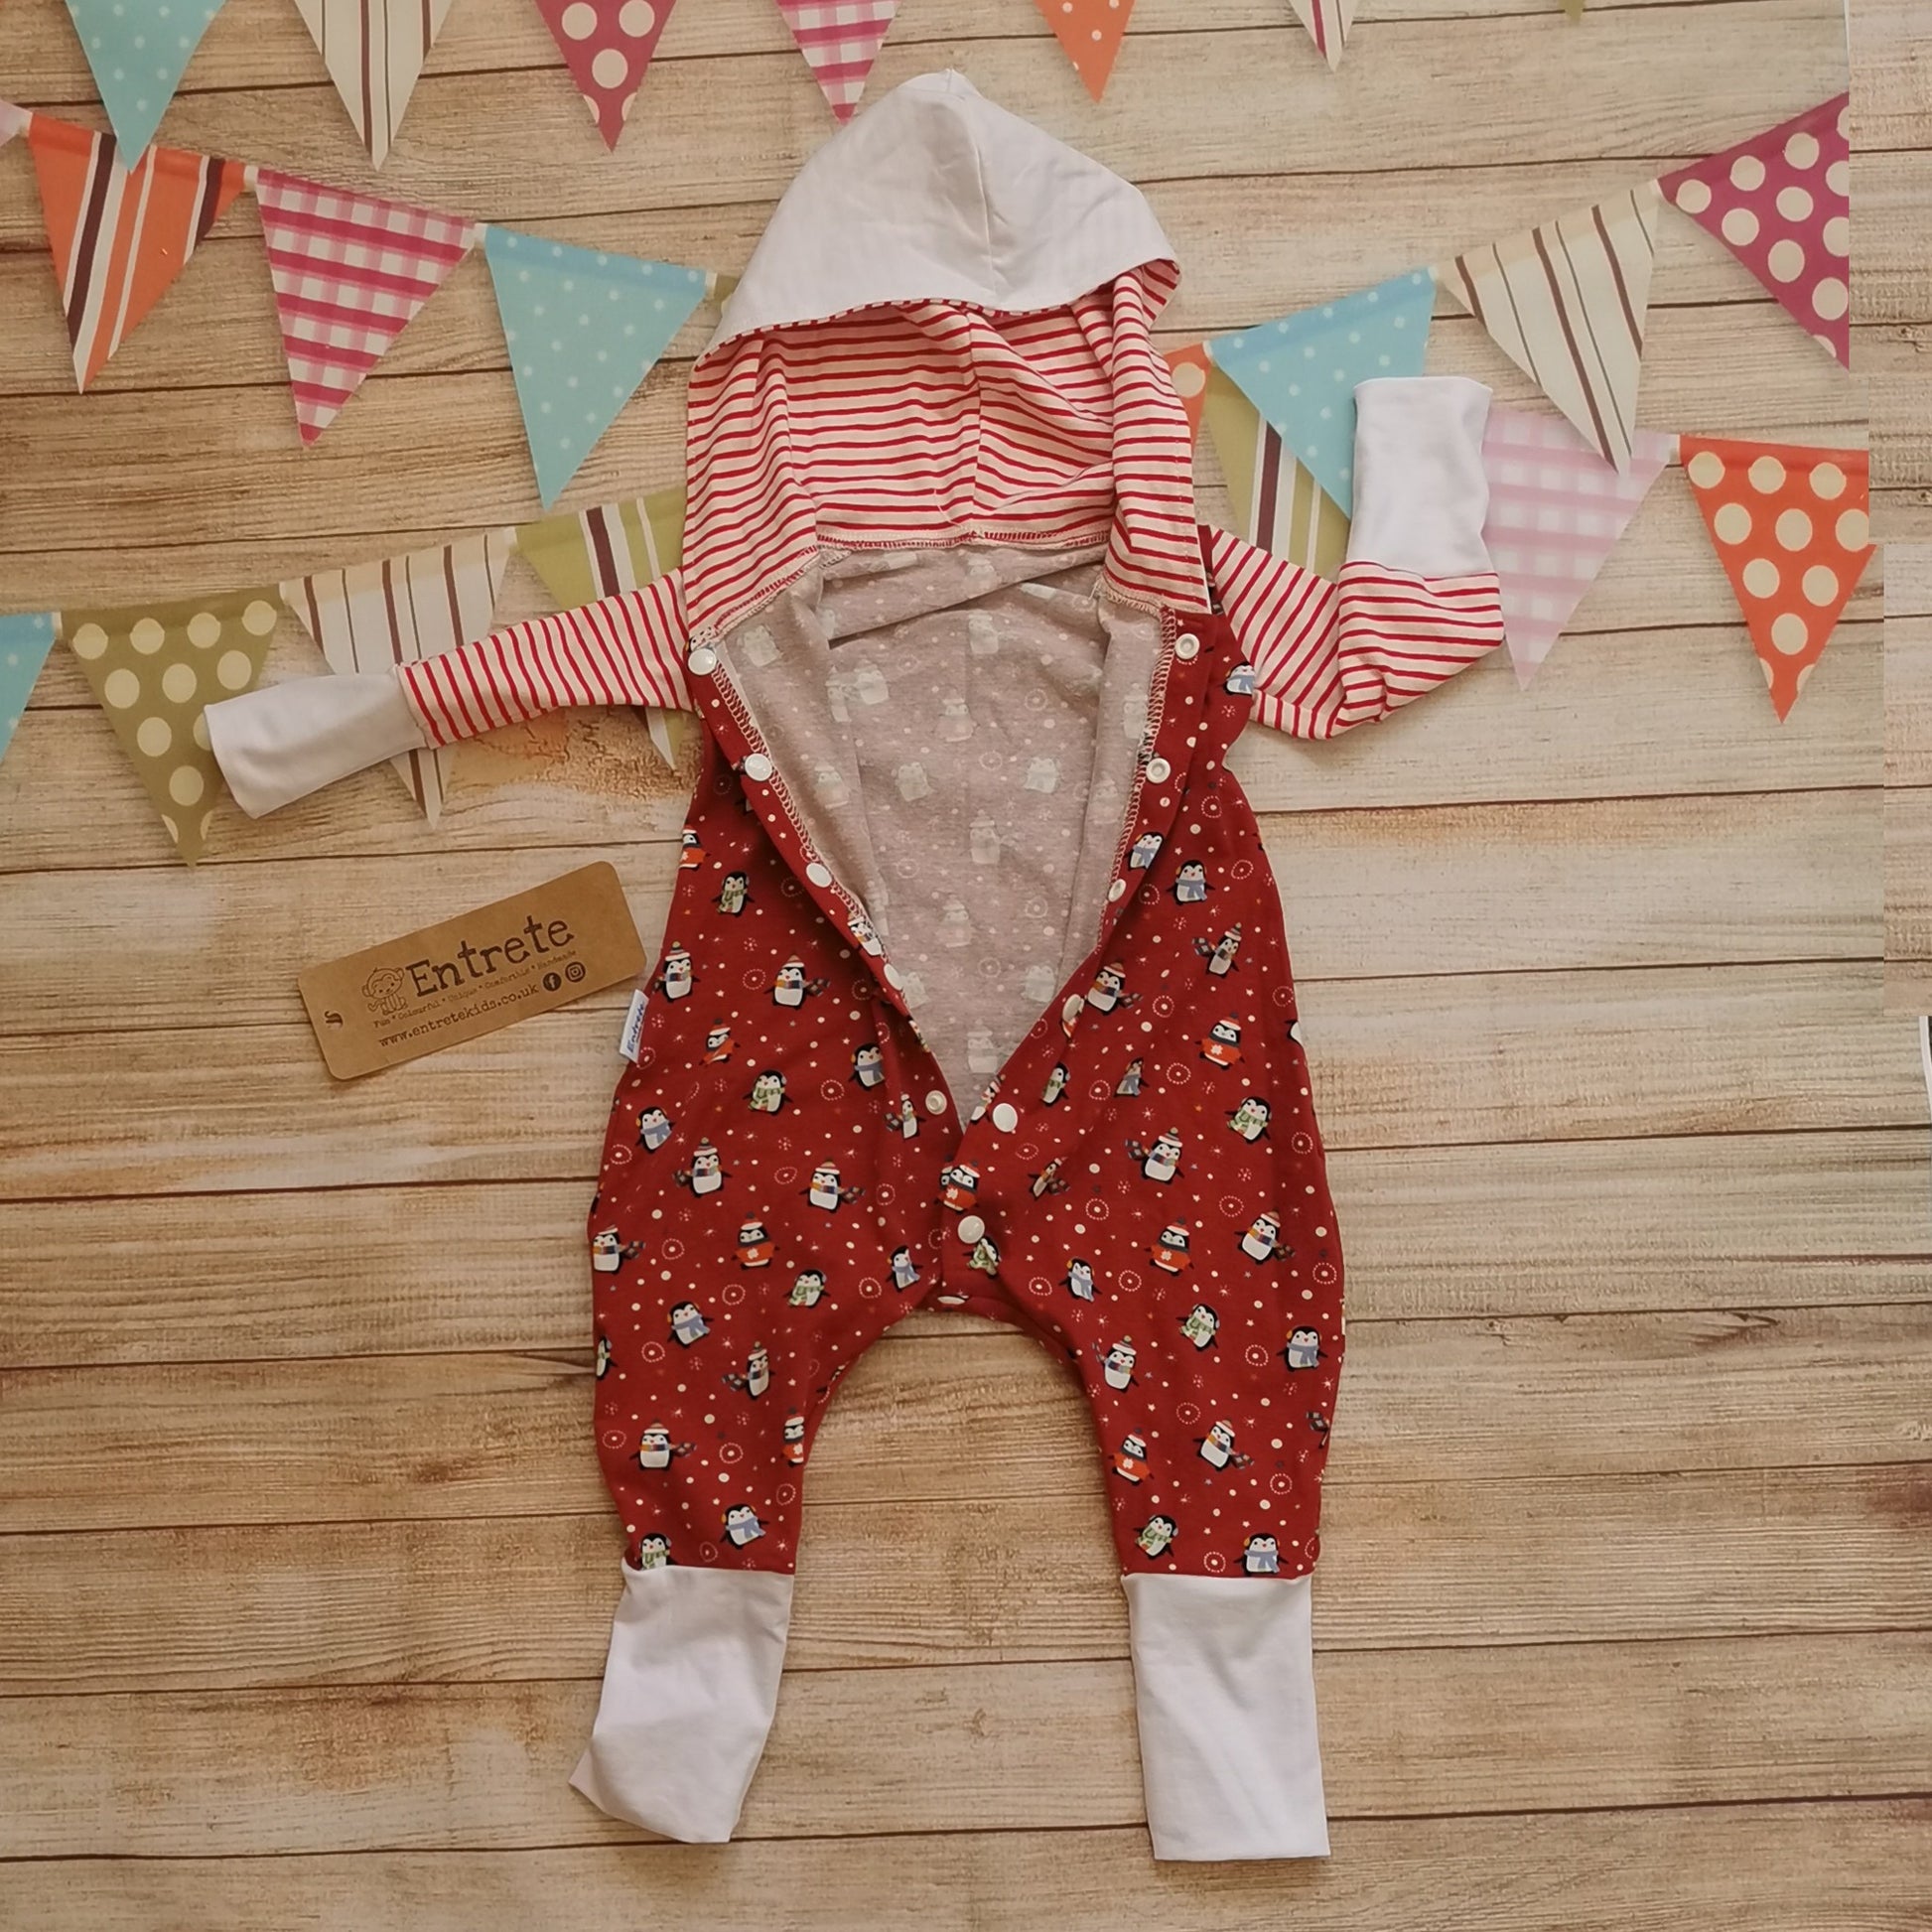 The epic christmas penguins hooded popper romper. Handmade using red penguins, red striped and white cotton jerseys for the perfect Christmas loungewear! Showing the popper entry.